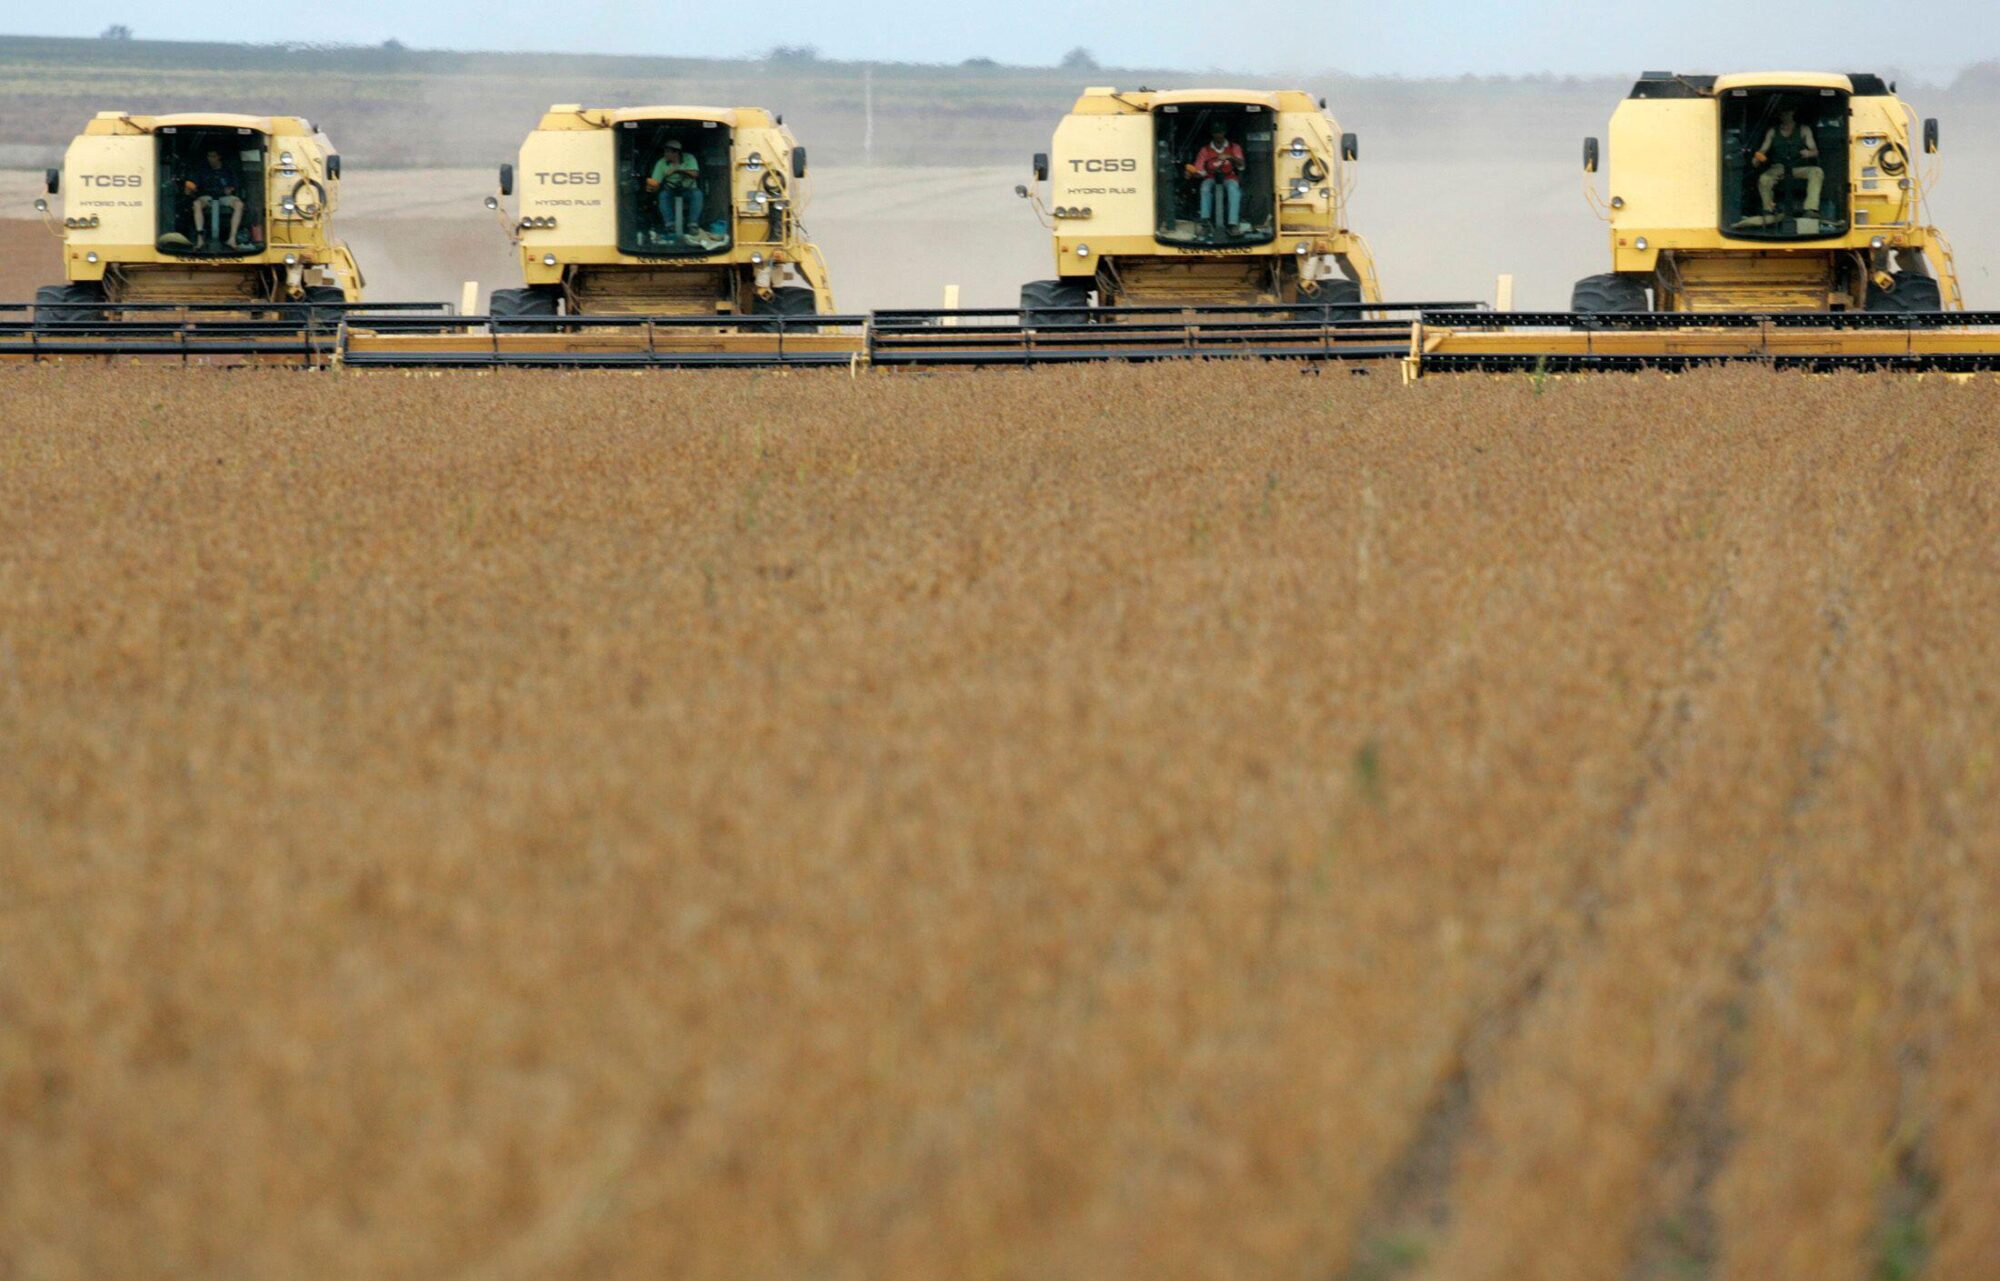 Four soybean harvesters in one field